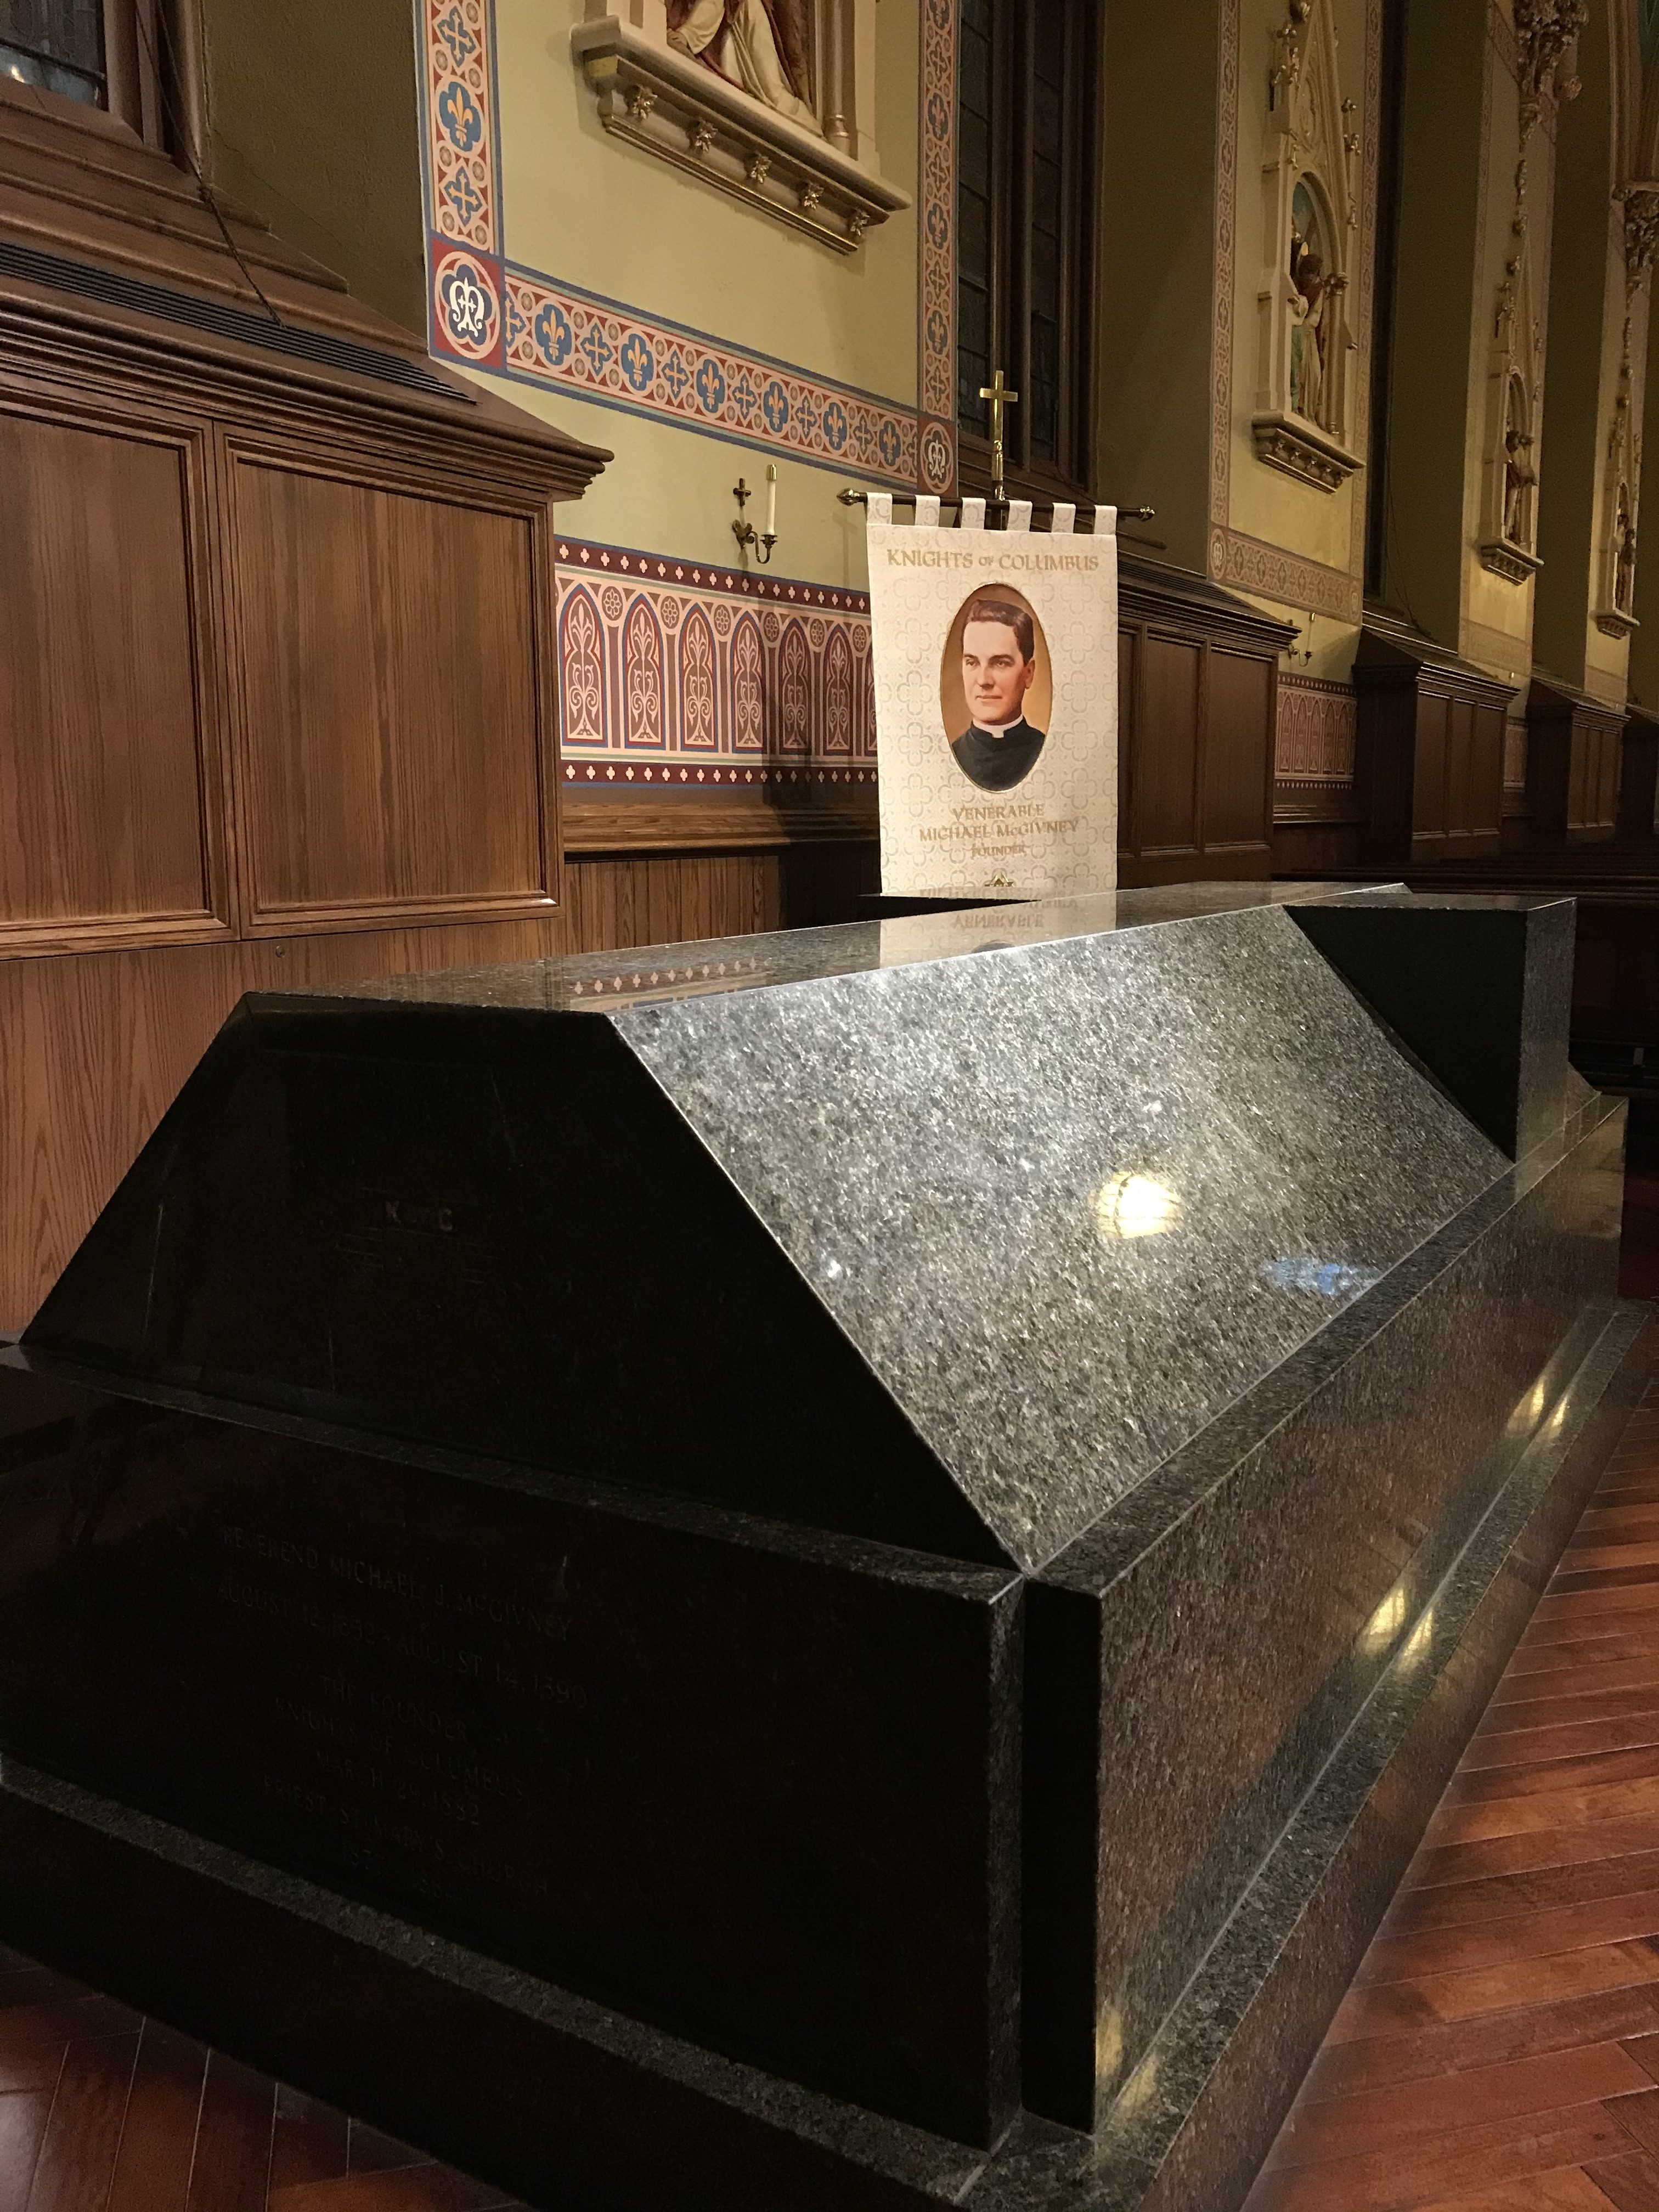 Sarcophagus-of-Father-McGivney-at-Saint-Marys-Church-in-New-Haven-Photo-Credit-Andrew-Fowler-rotated.jpeg